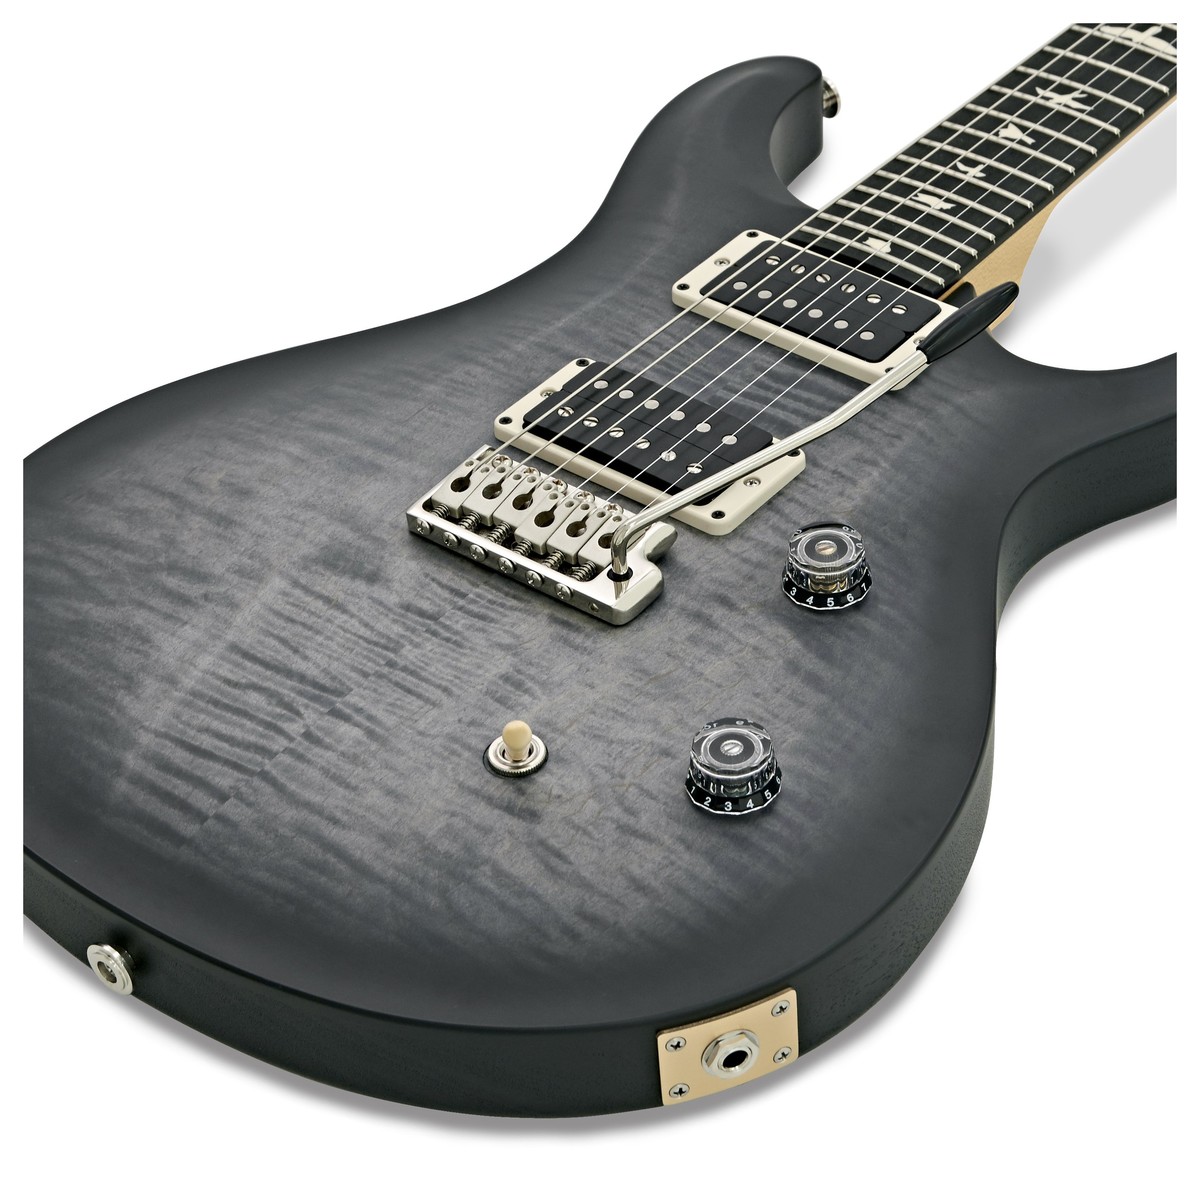 Prs Ce 24 Bolt-on Usa Hh Trem Rw - Faded Gray Black - Double cut electric guitar - Variation 2